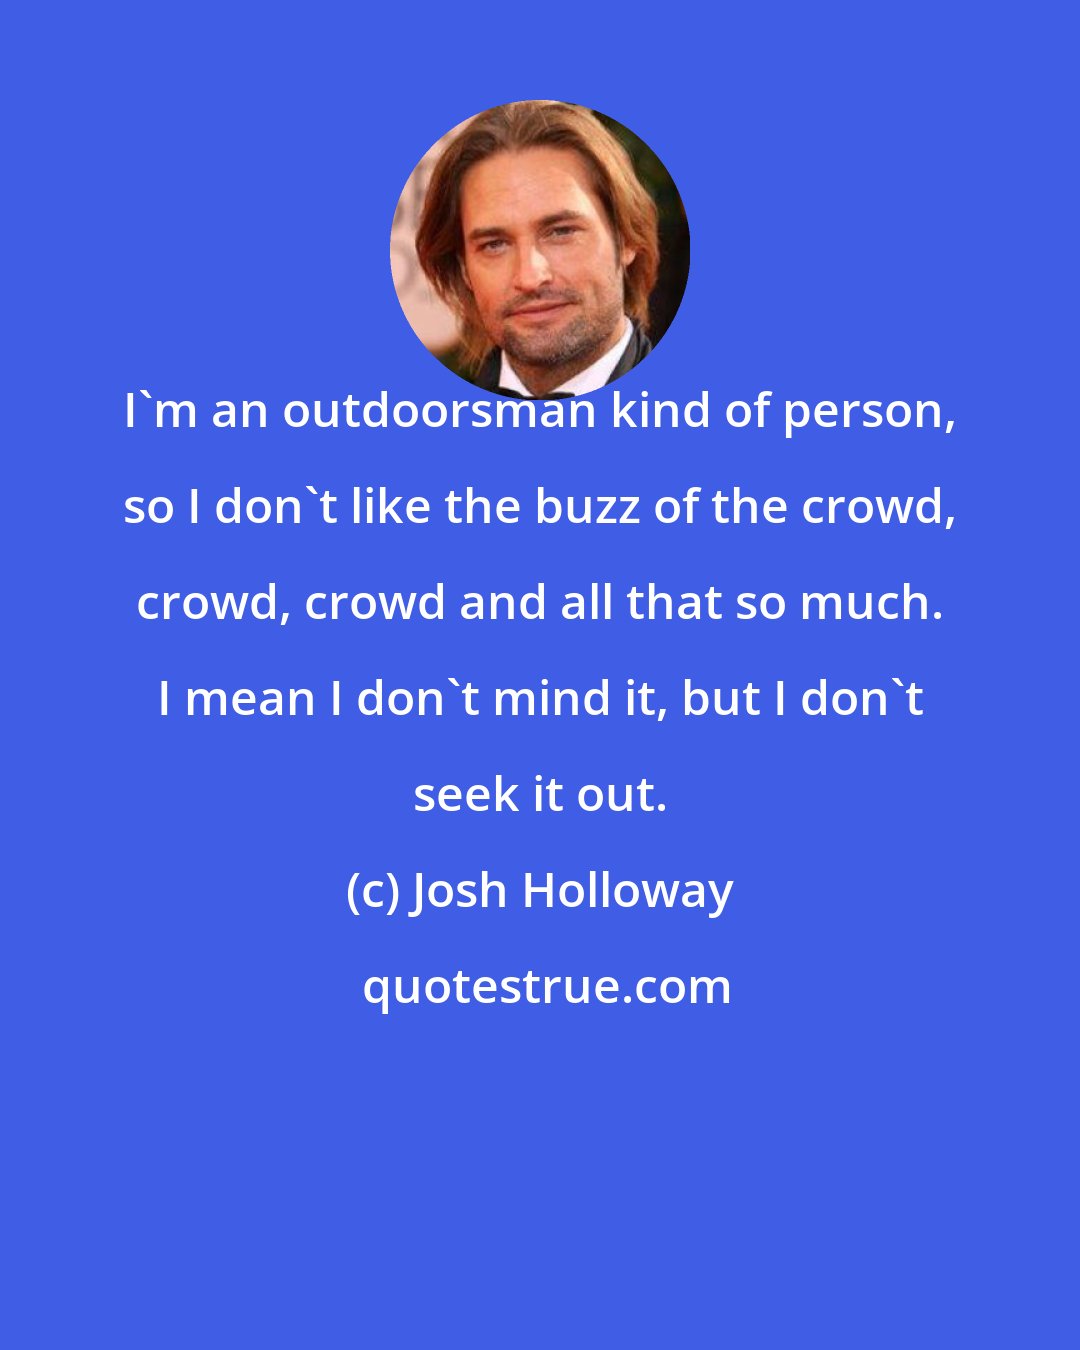 Josh Holloway: I'm an outdoorsman kind of person, so I don't like the buzz of the crowd, crowd, crowd and all that so much. I mean I don't mind it, but I don't seek it out.